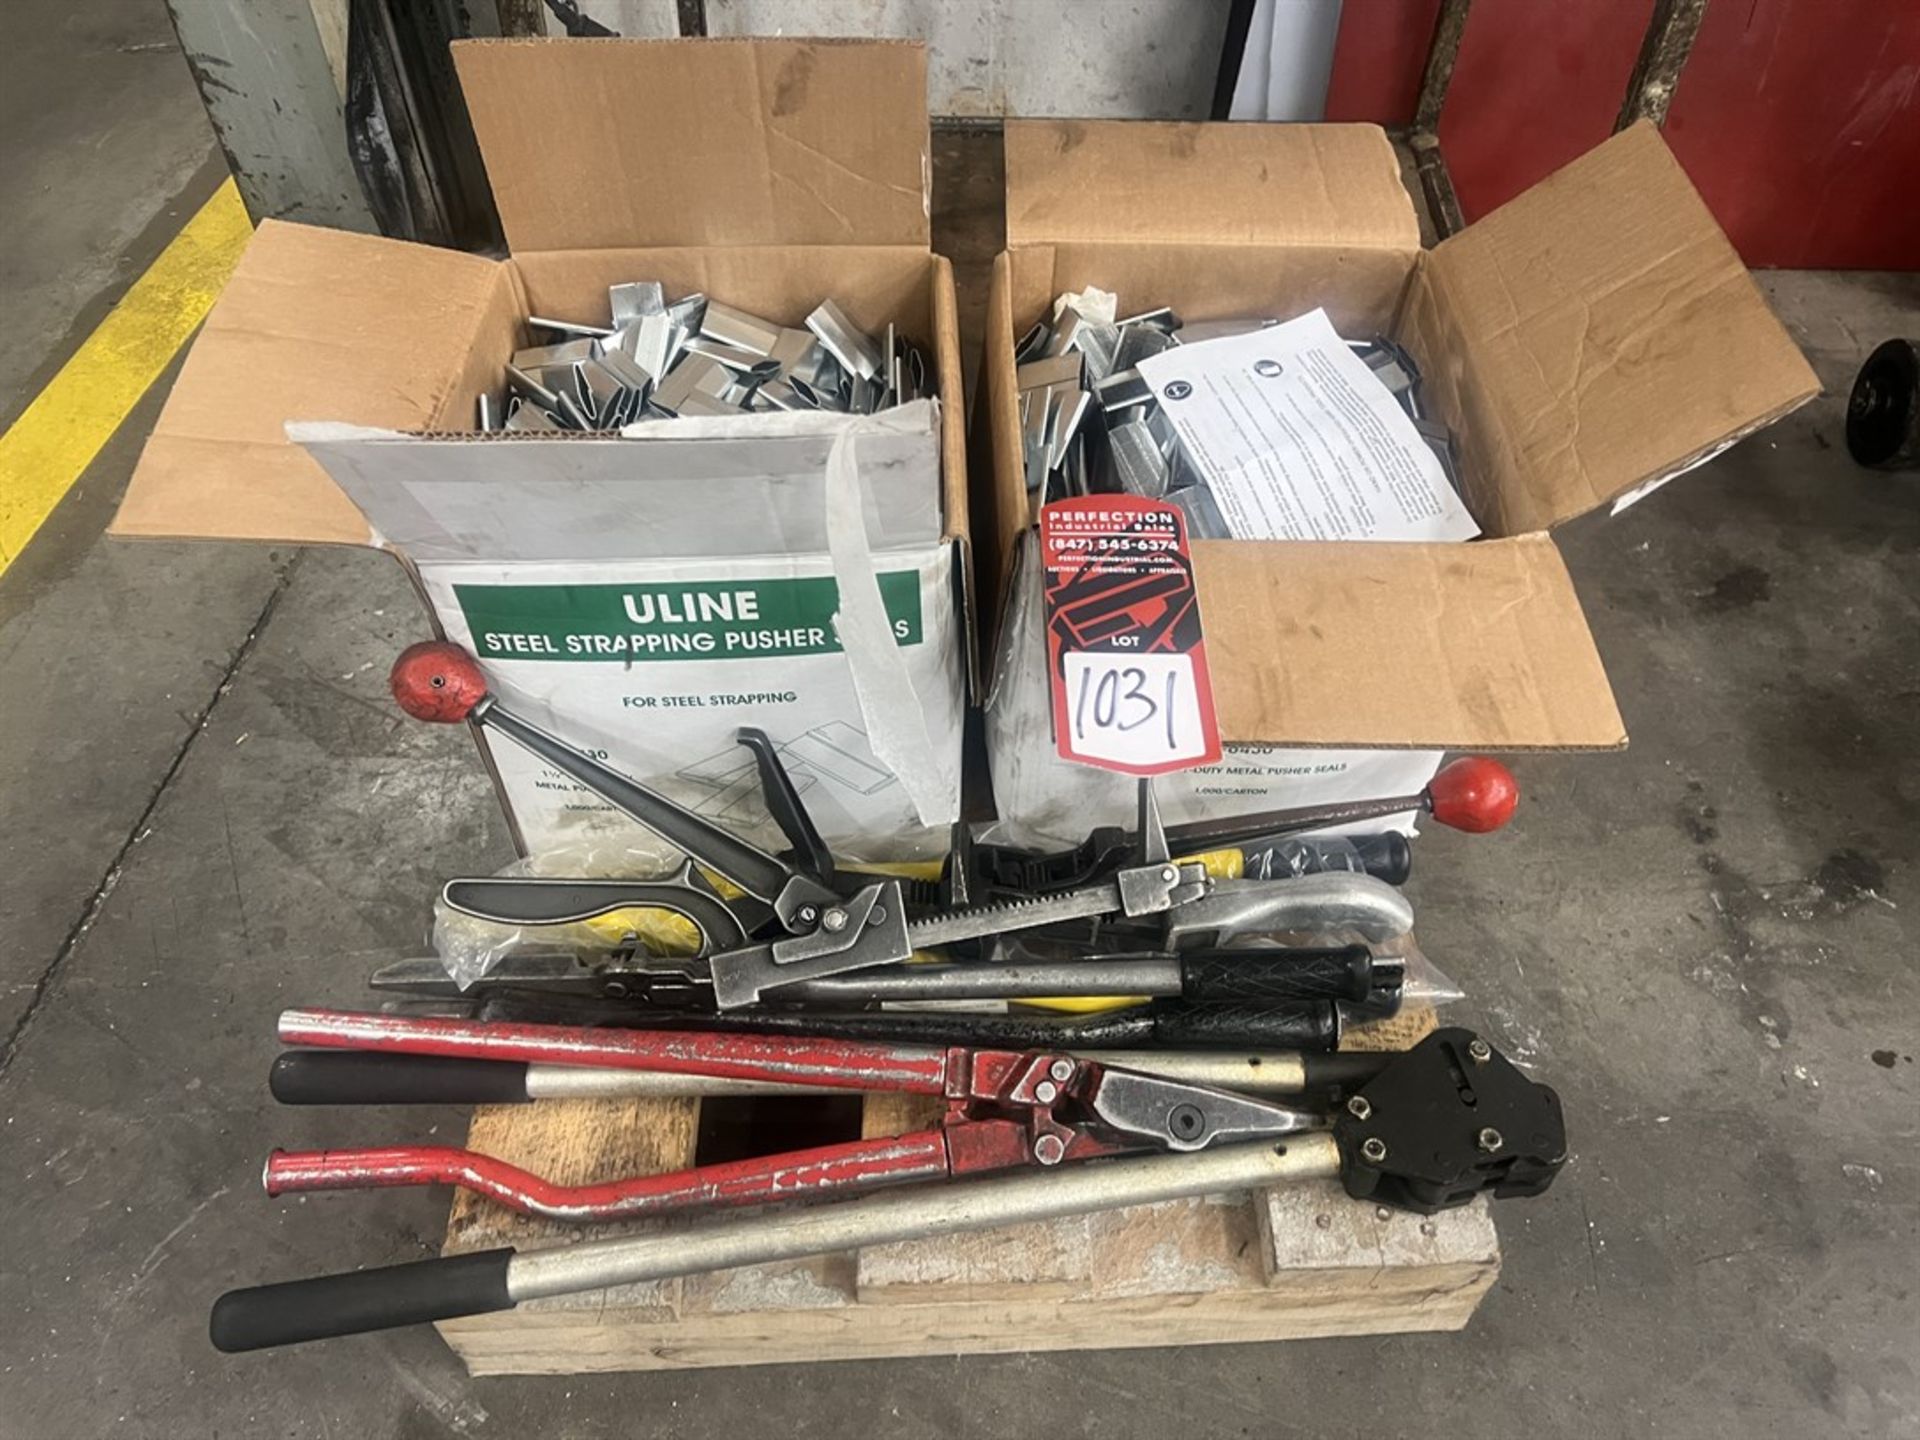 Lot of Assorted Banding Cart Tool Including Tensioners, Cutters, Sealers and (2) Boxes of Clips